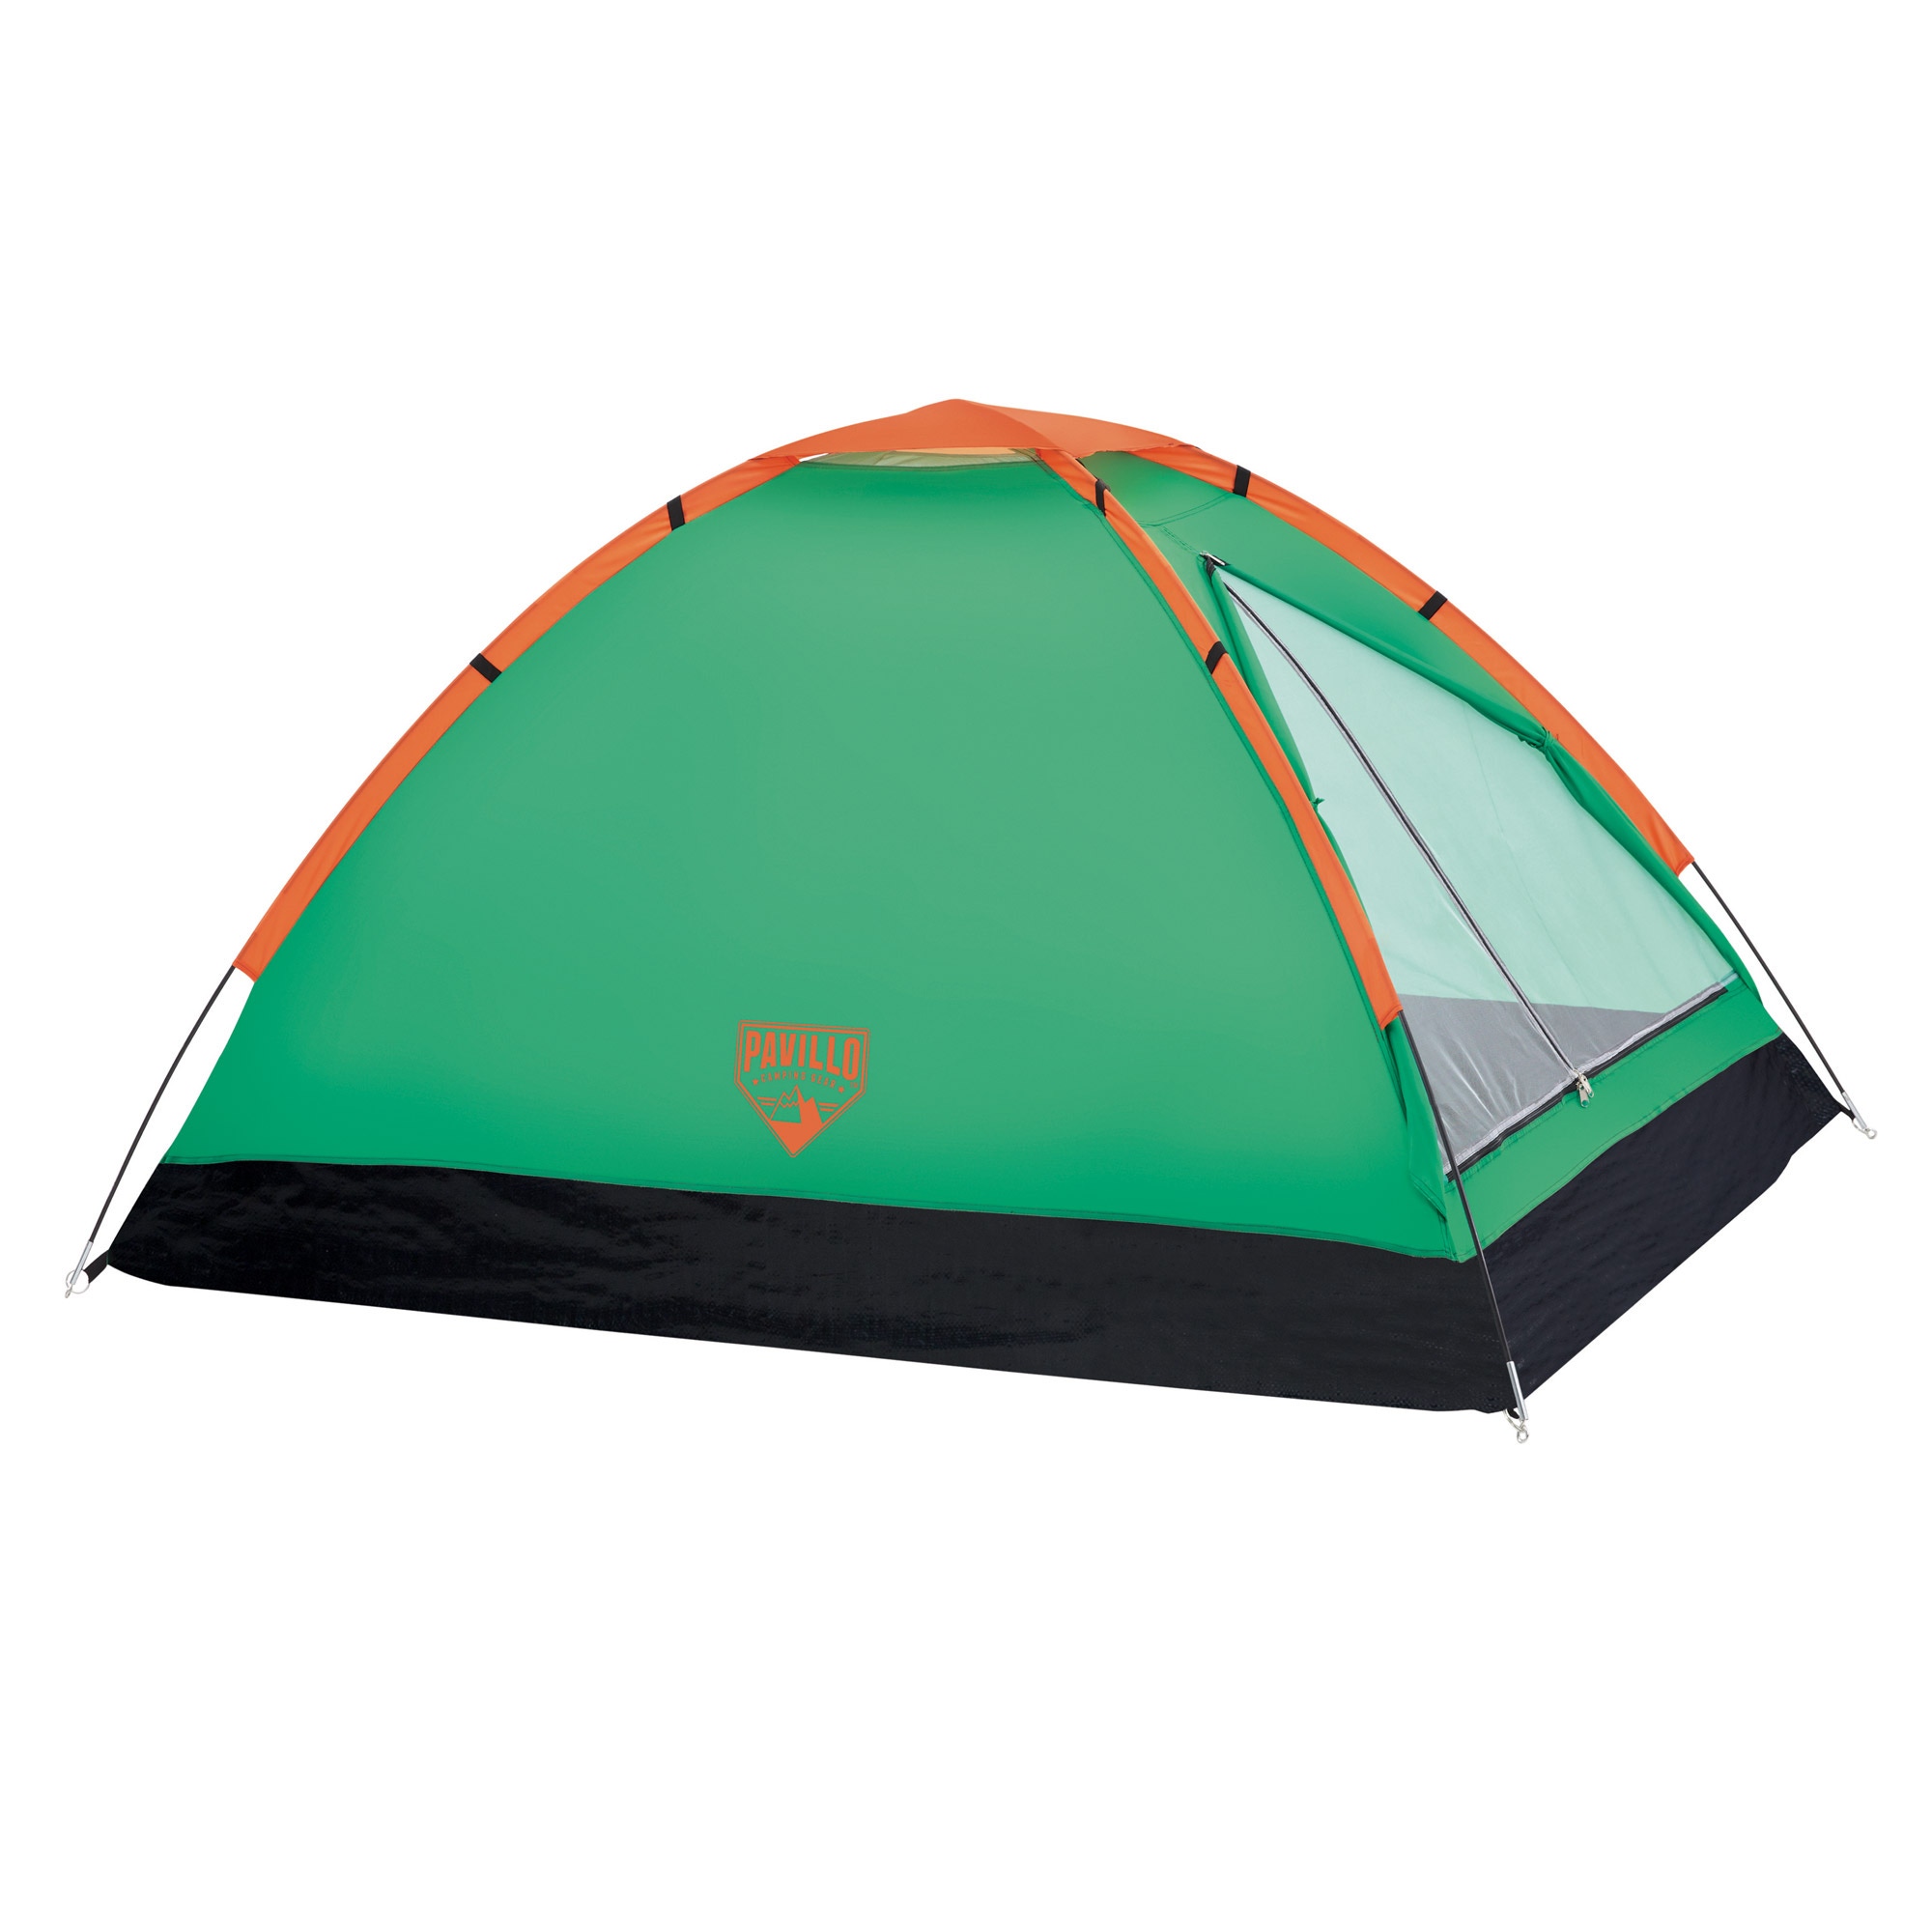 Cort camping 2 persoane Bestway Monodome 68040 poliester 145 x 205 x 100 cm